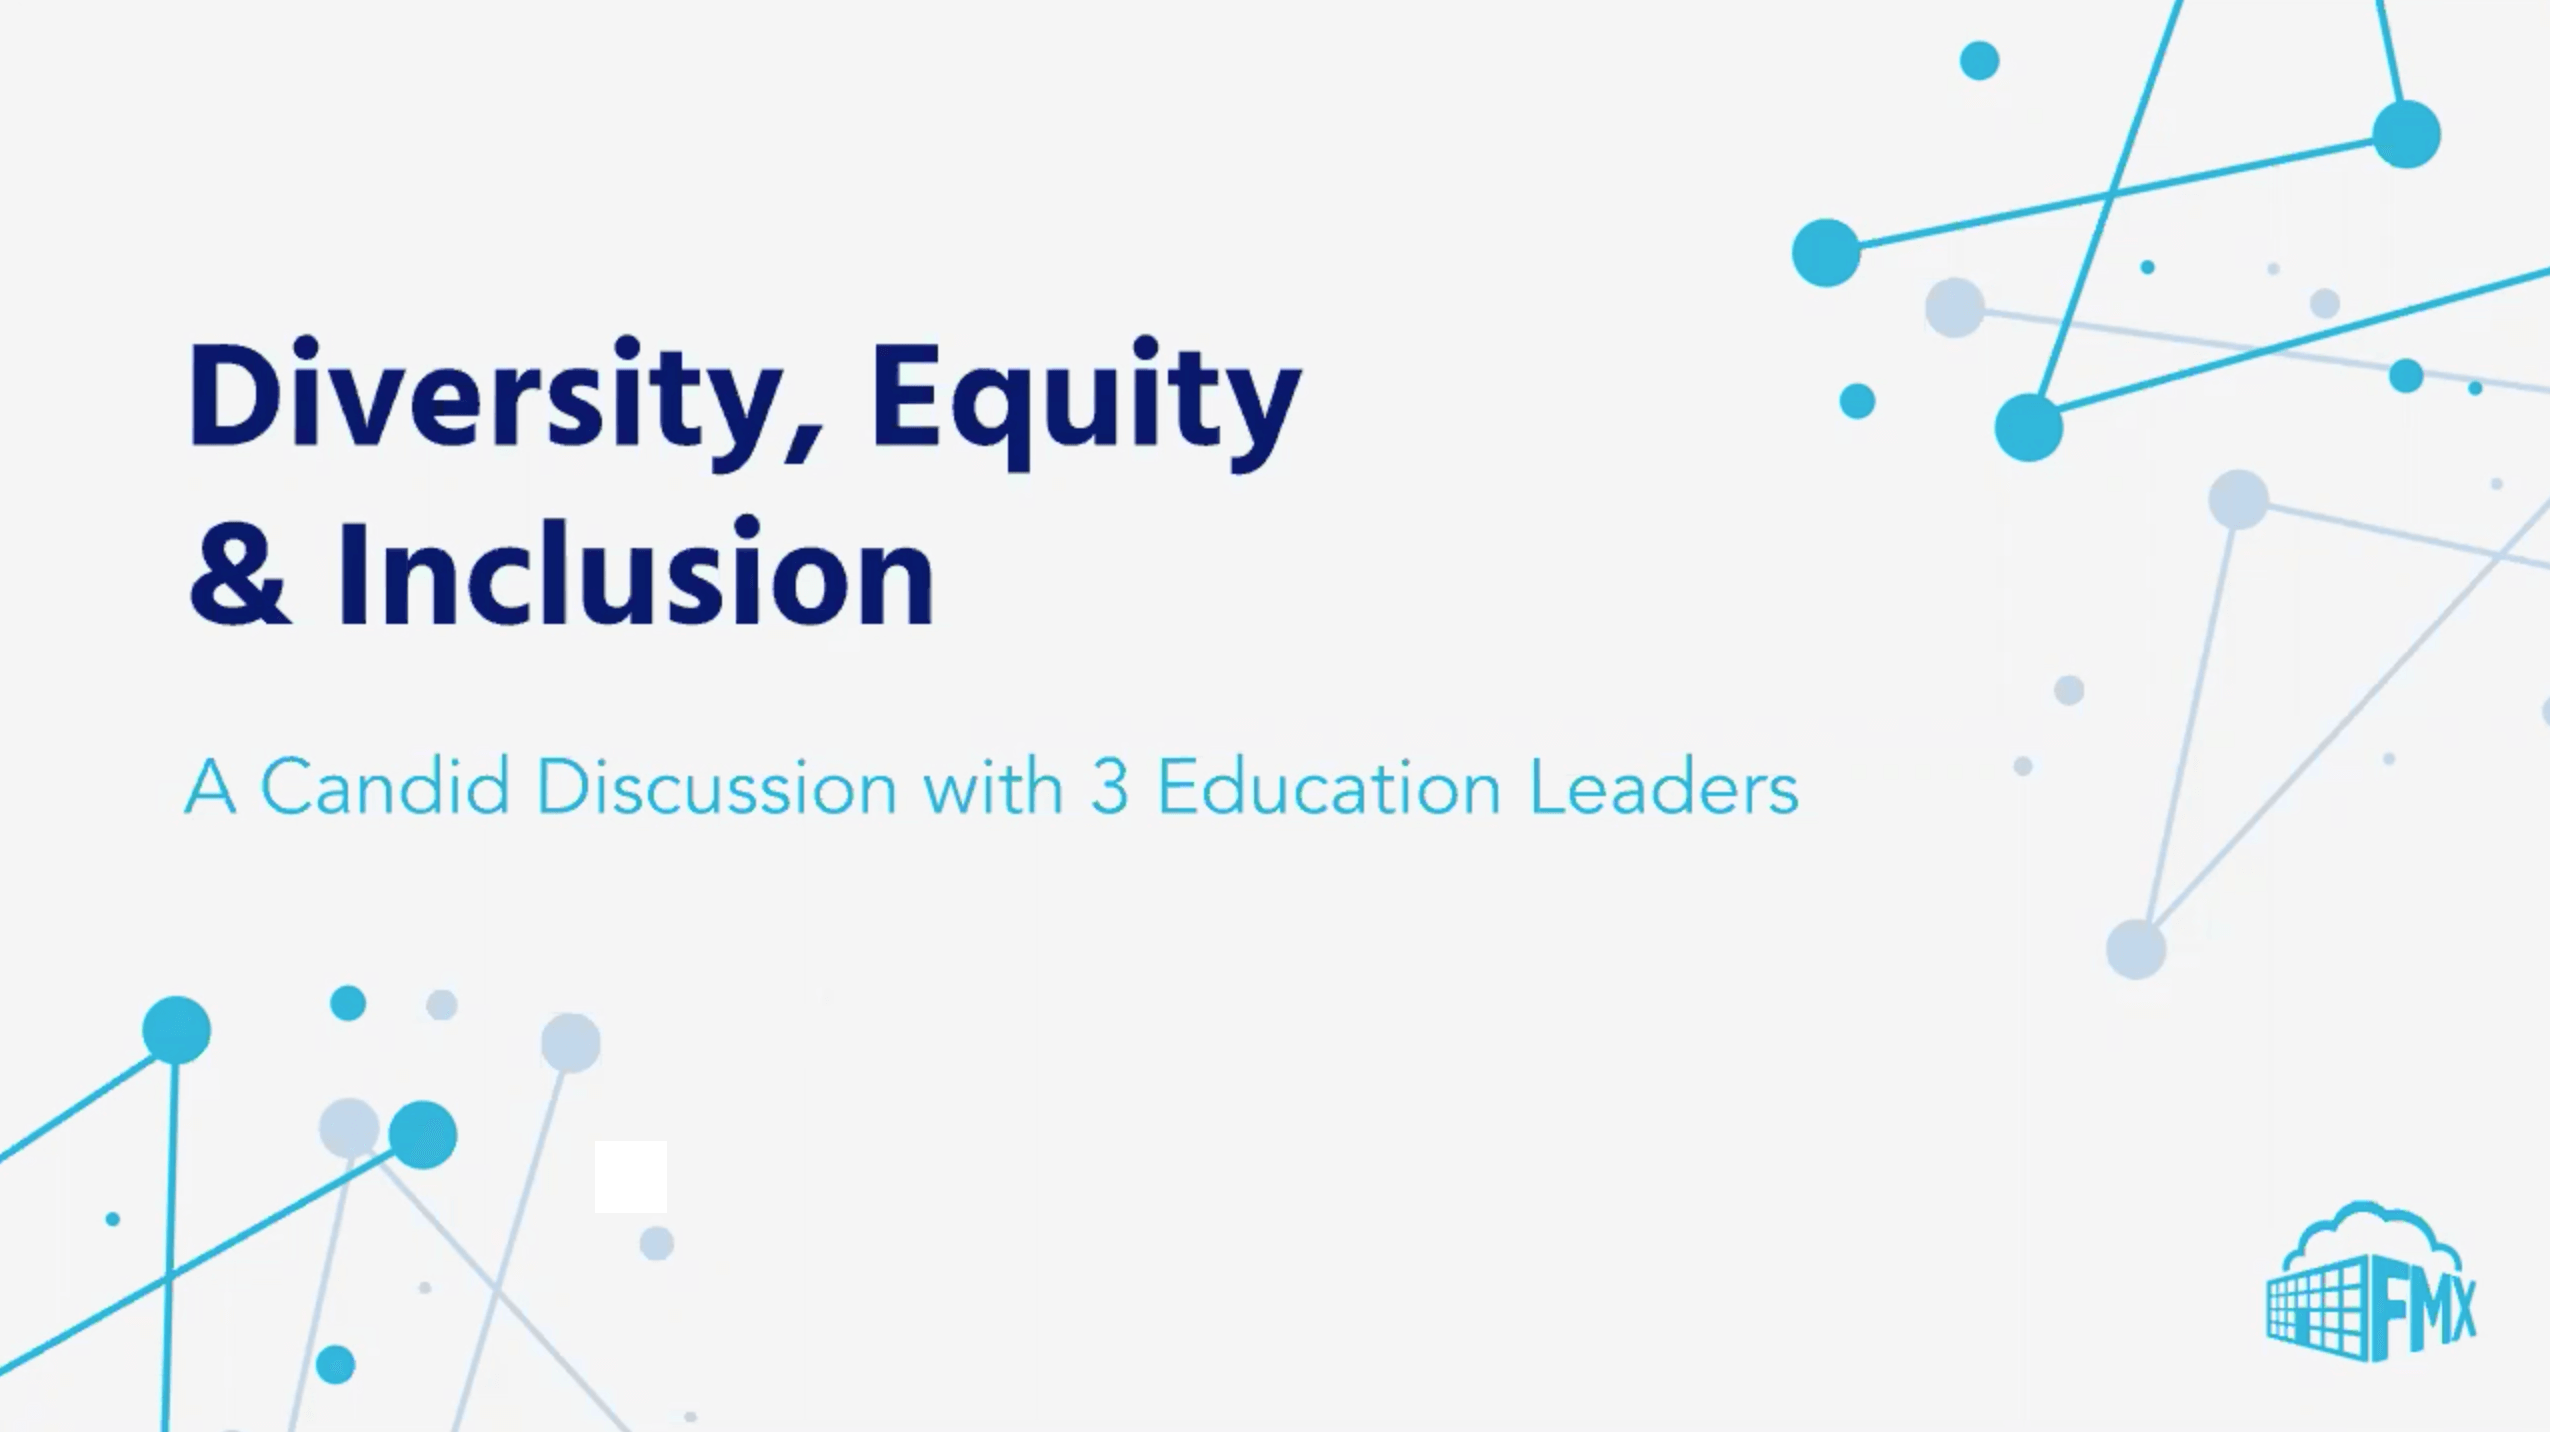 Diversity, Equity & Inclusion in Education: Best Practices for the New Future